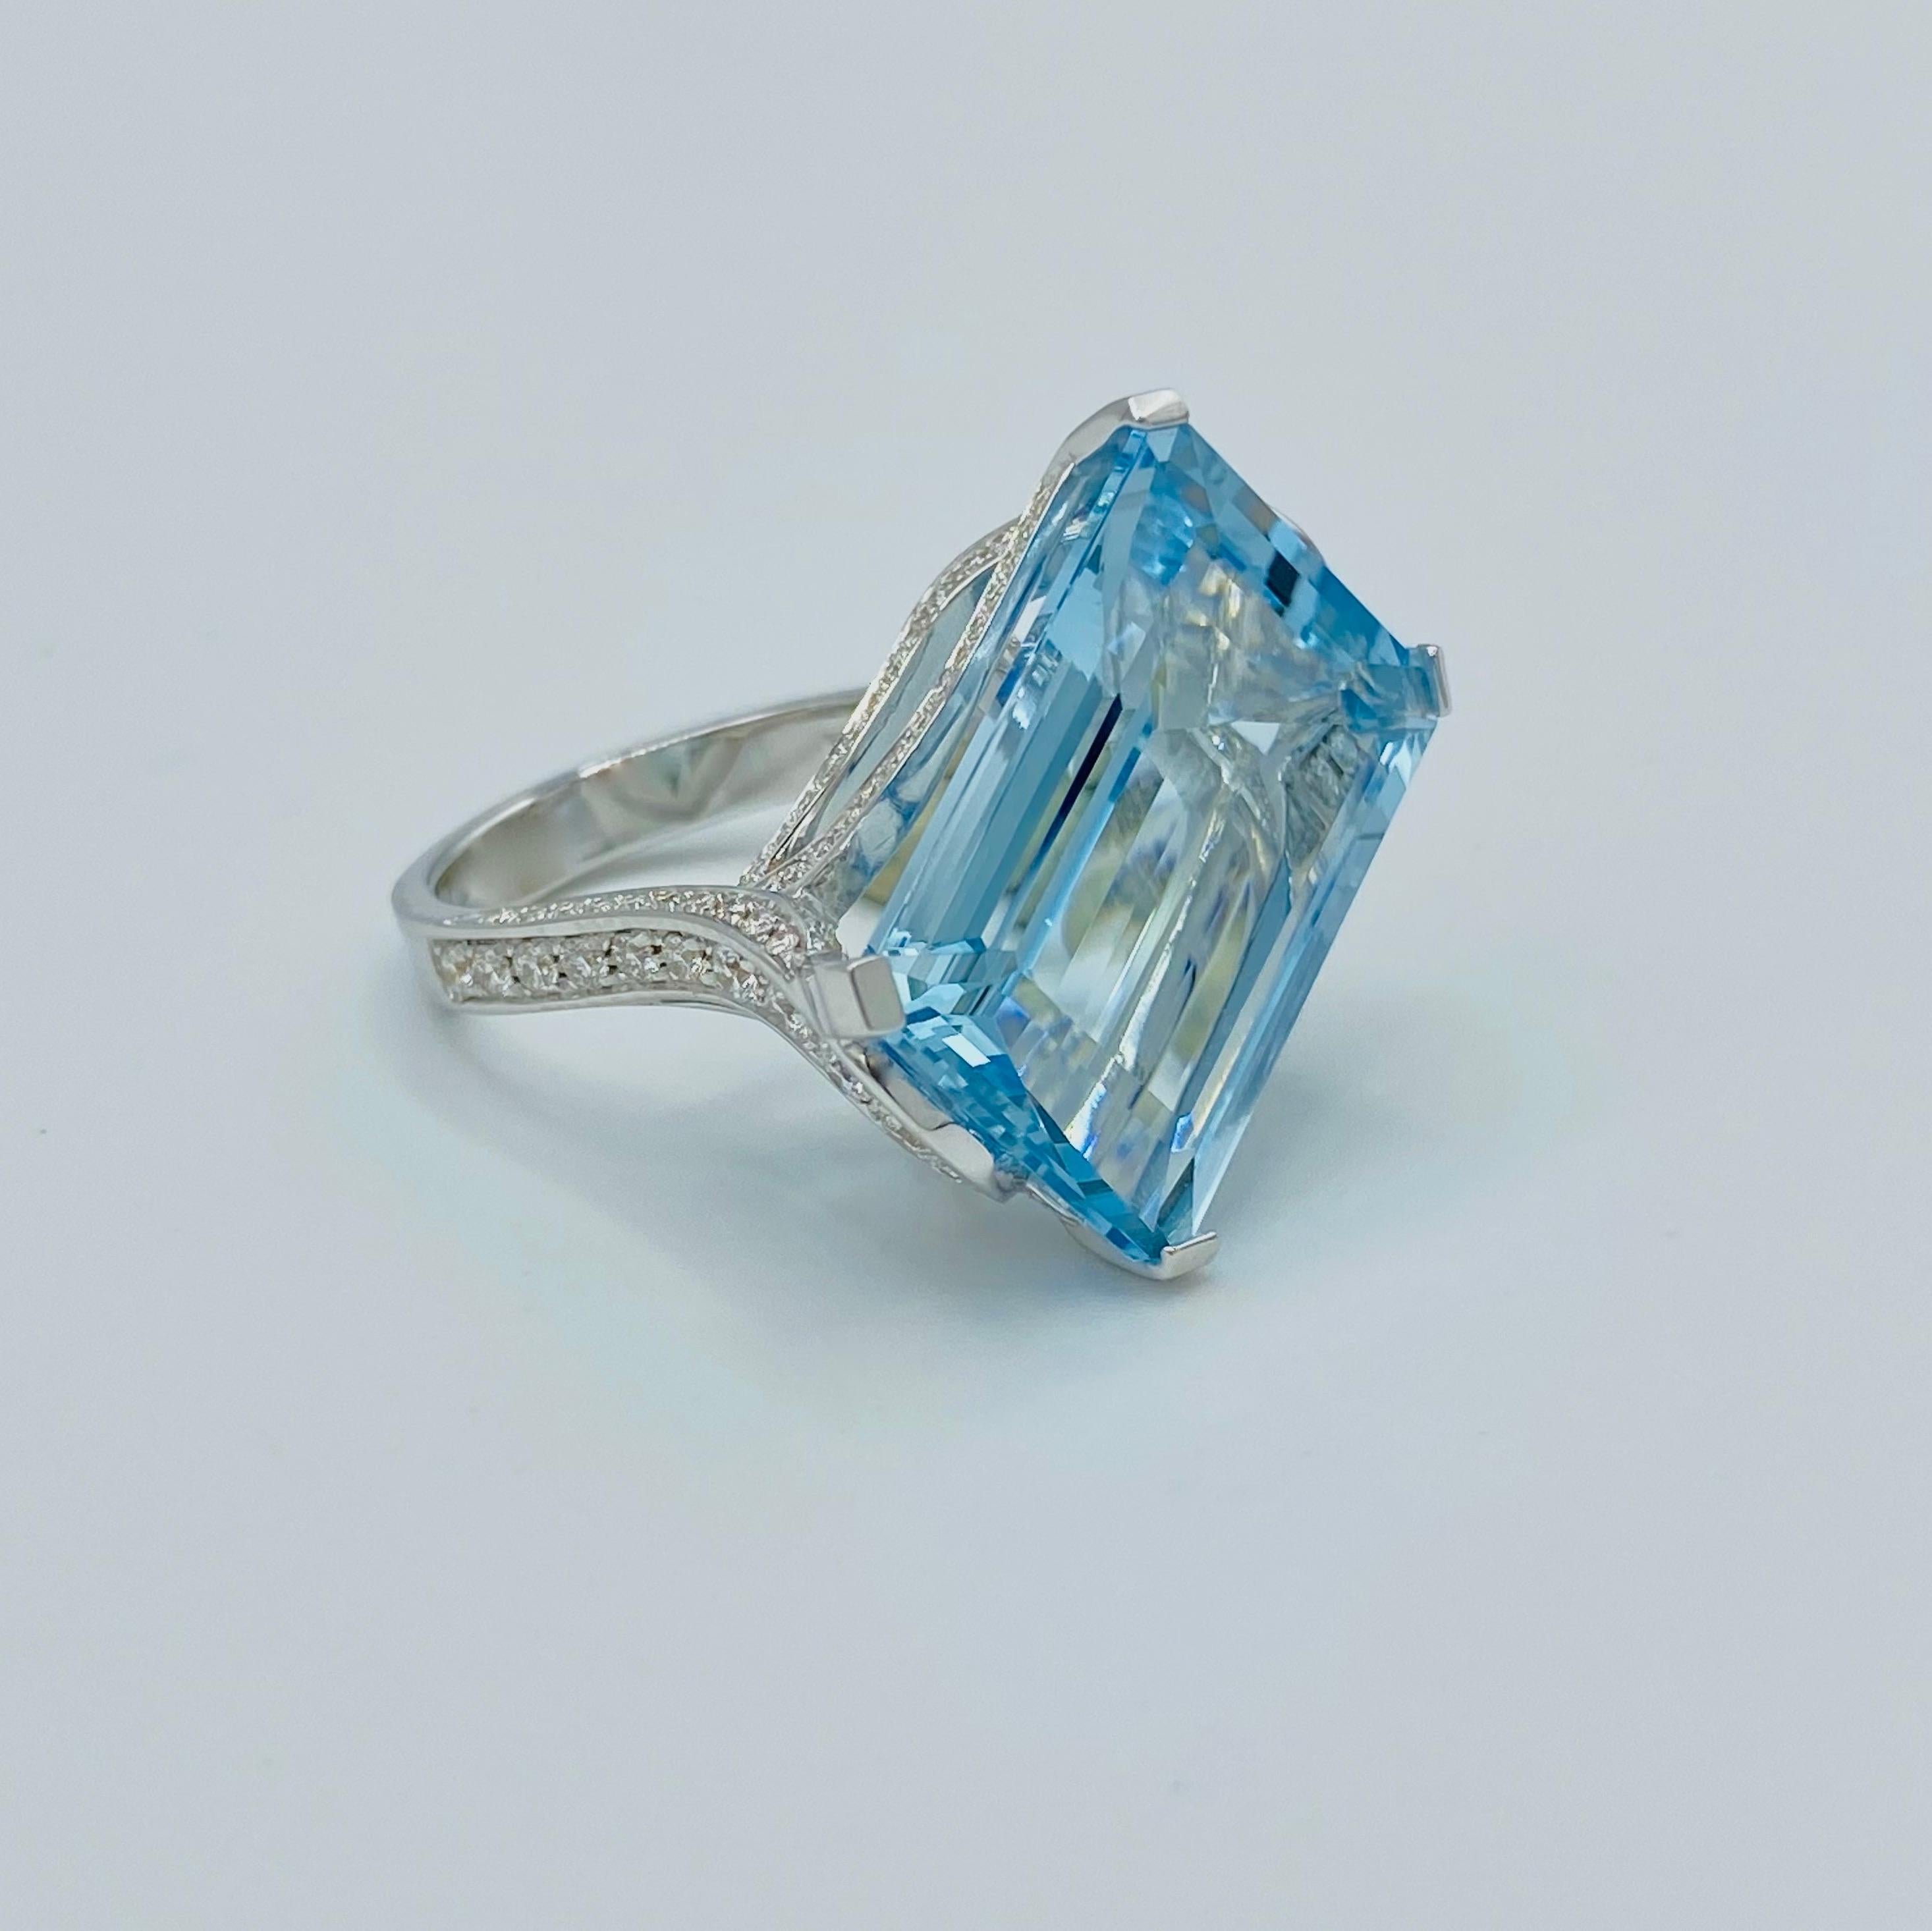 Ct 13.17 Aquamarine White Diamond Cocktail 18Kt Gold Ring Petronilla Made in Italy
I made an elegant cocktail ring with an unusually positioned 13.17 ct aquamarine at an angle to the axis of the finger.
The ring is set with micro-embedded diamonds